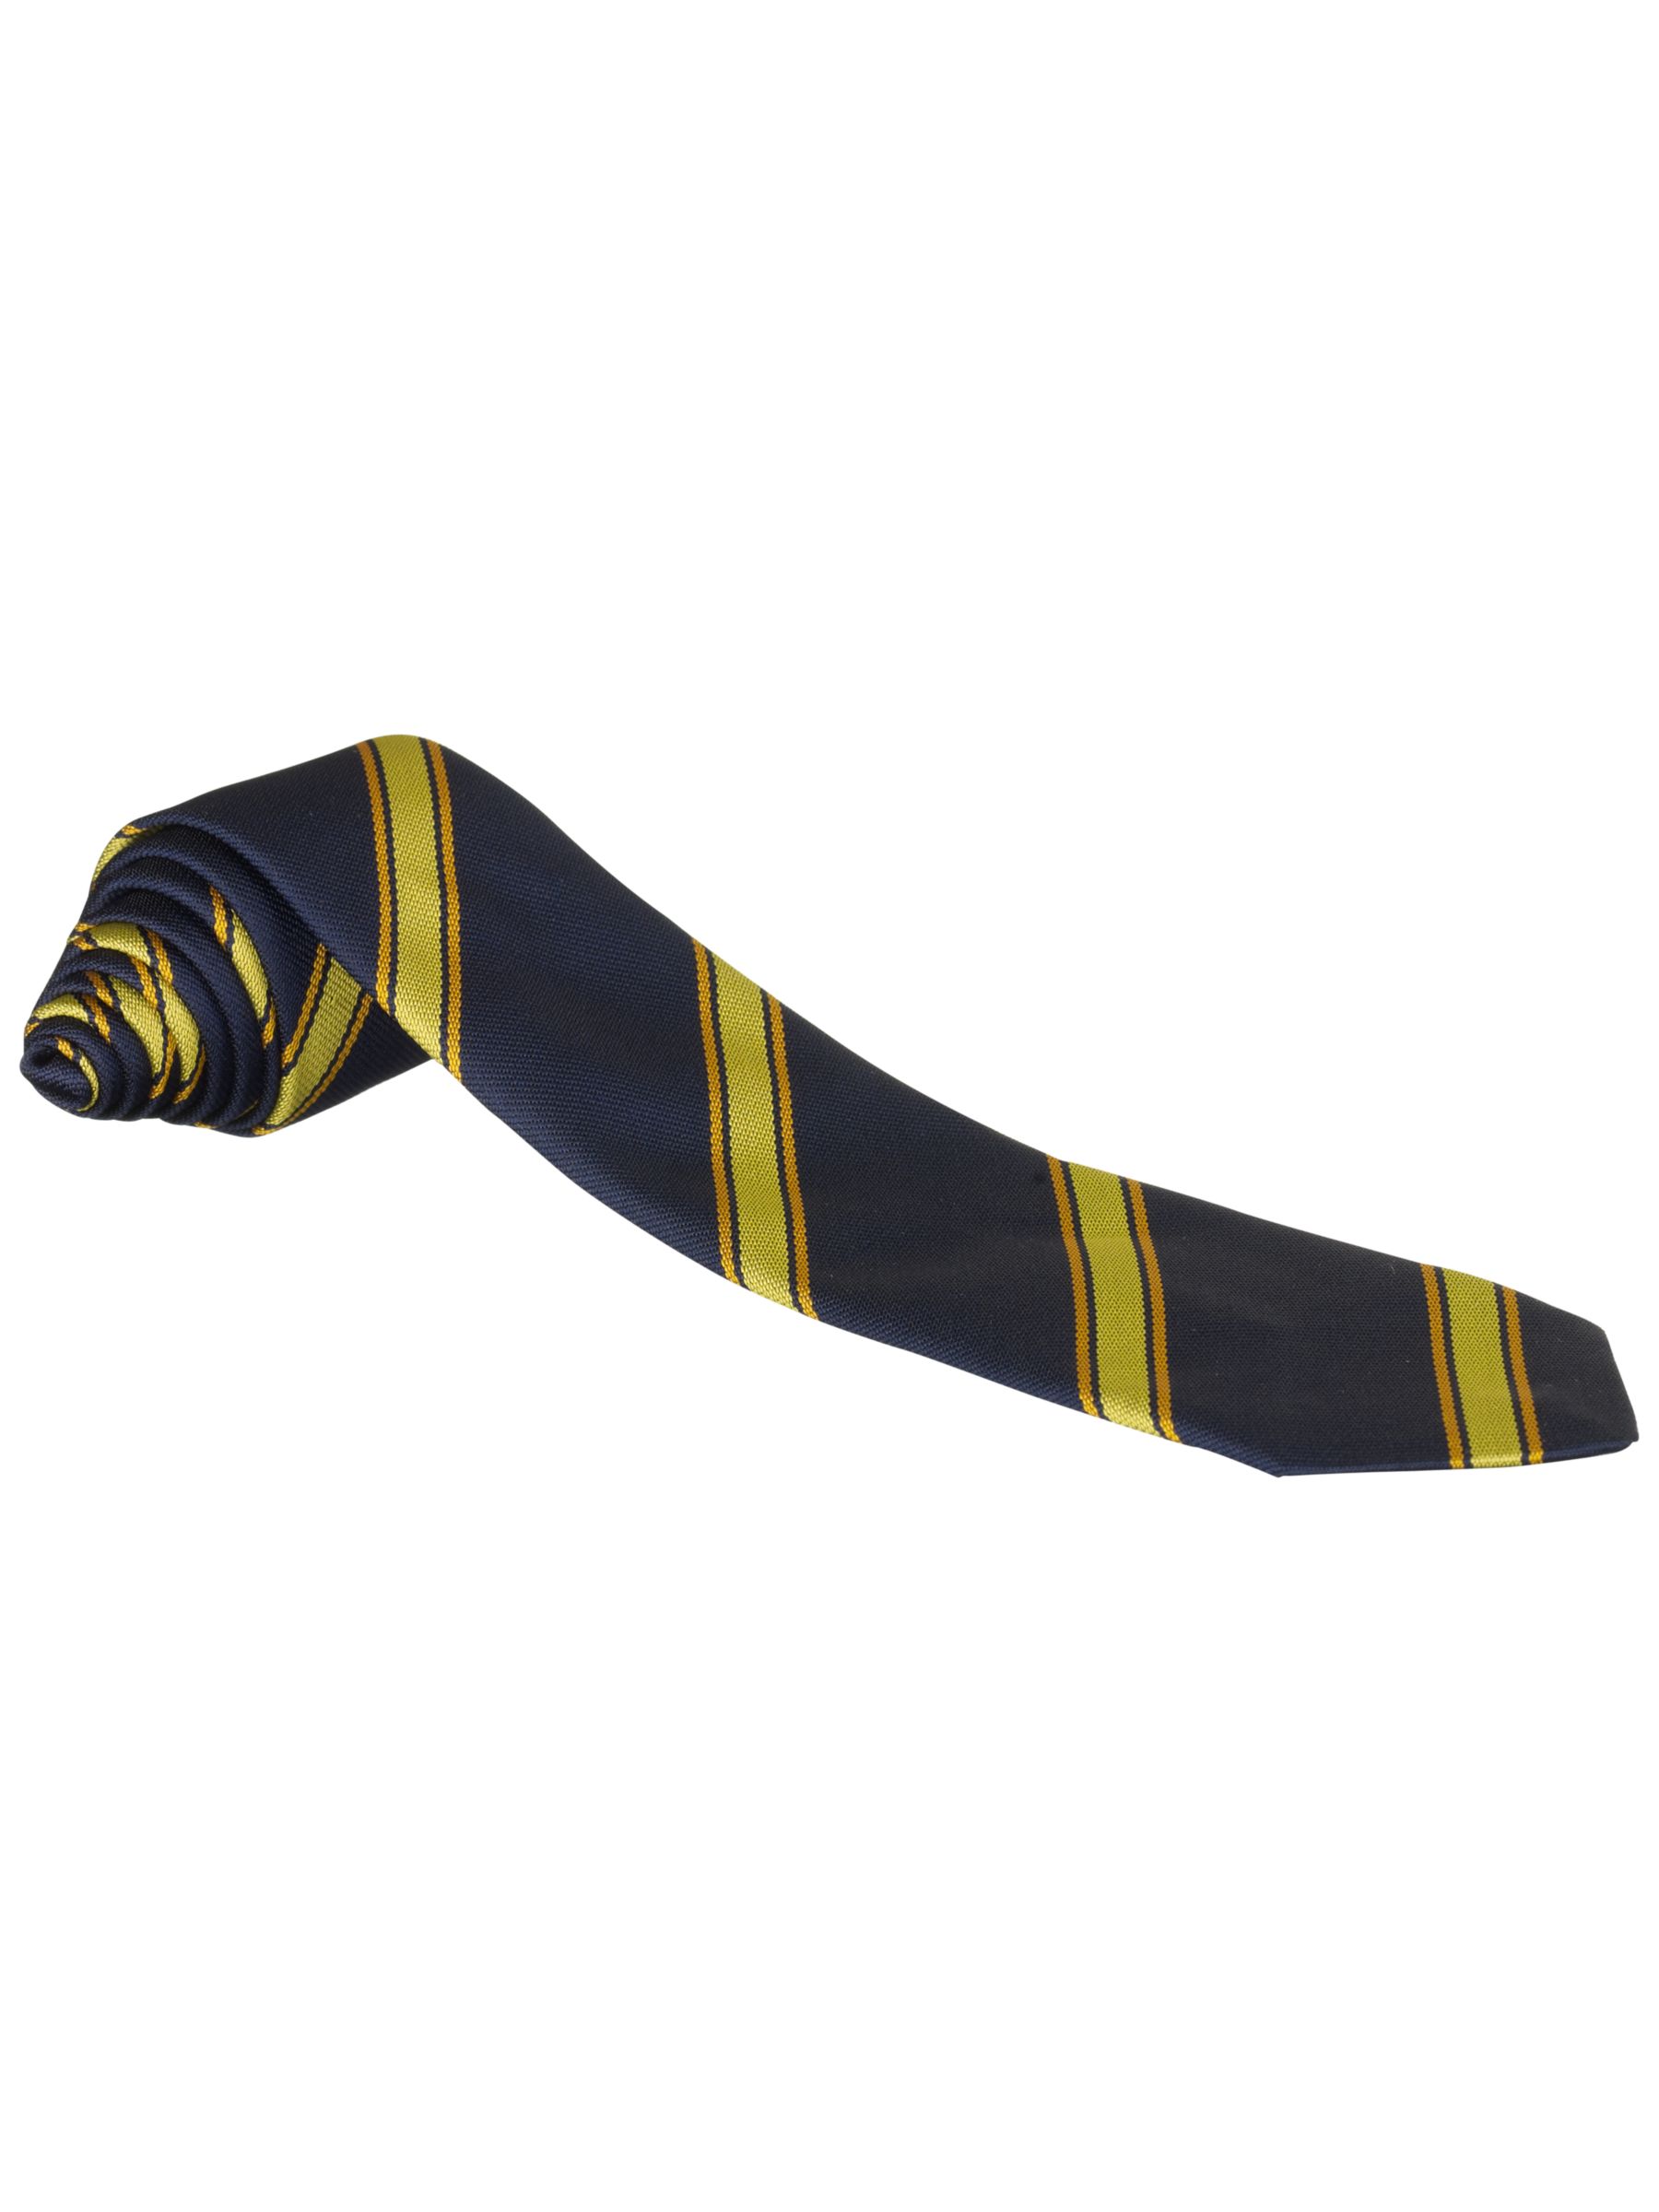 Navy And Gold Tie | John Lewis & Partners